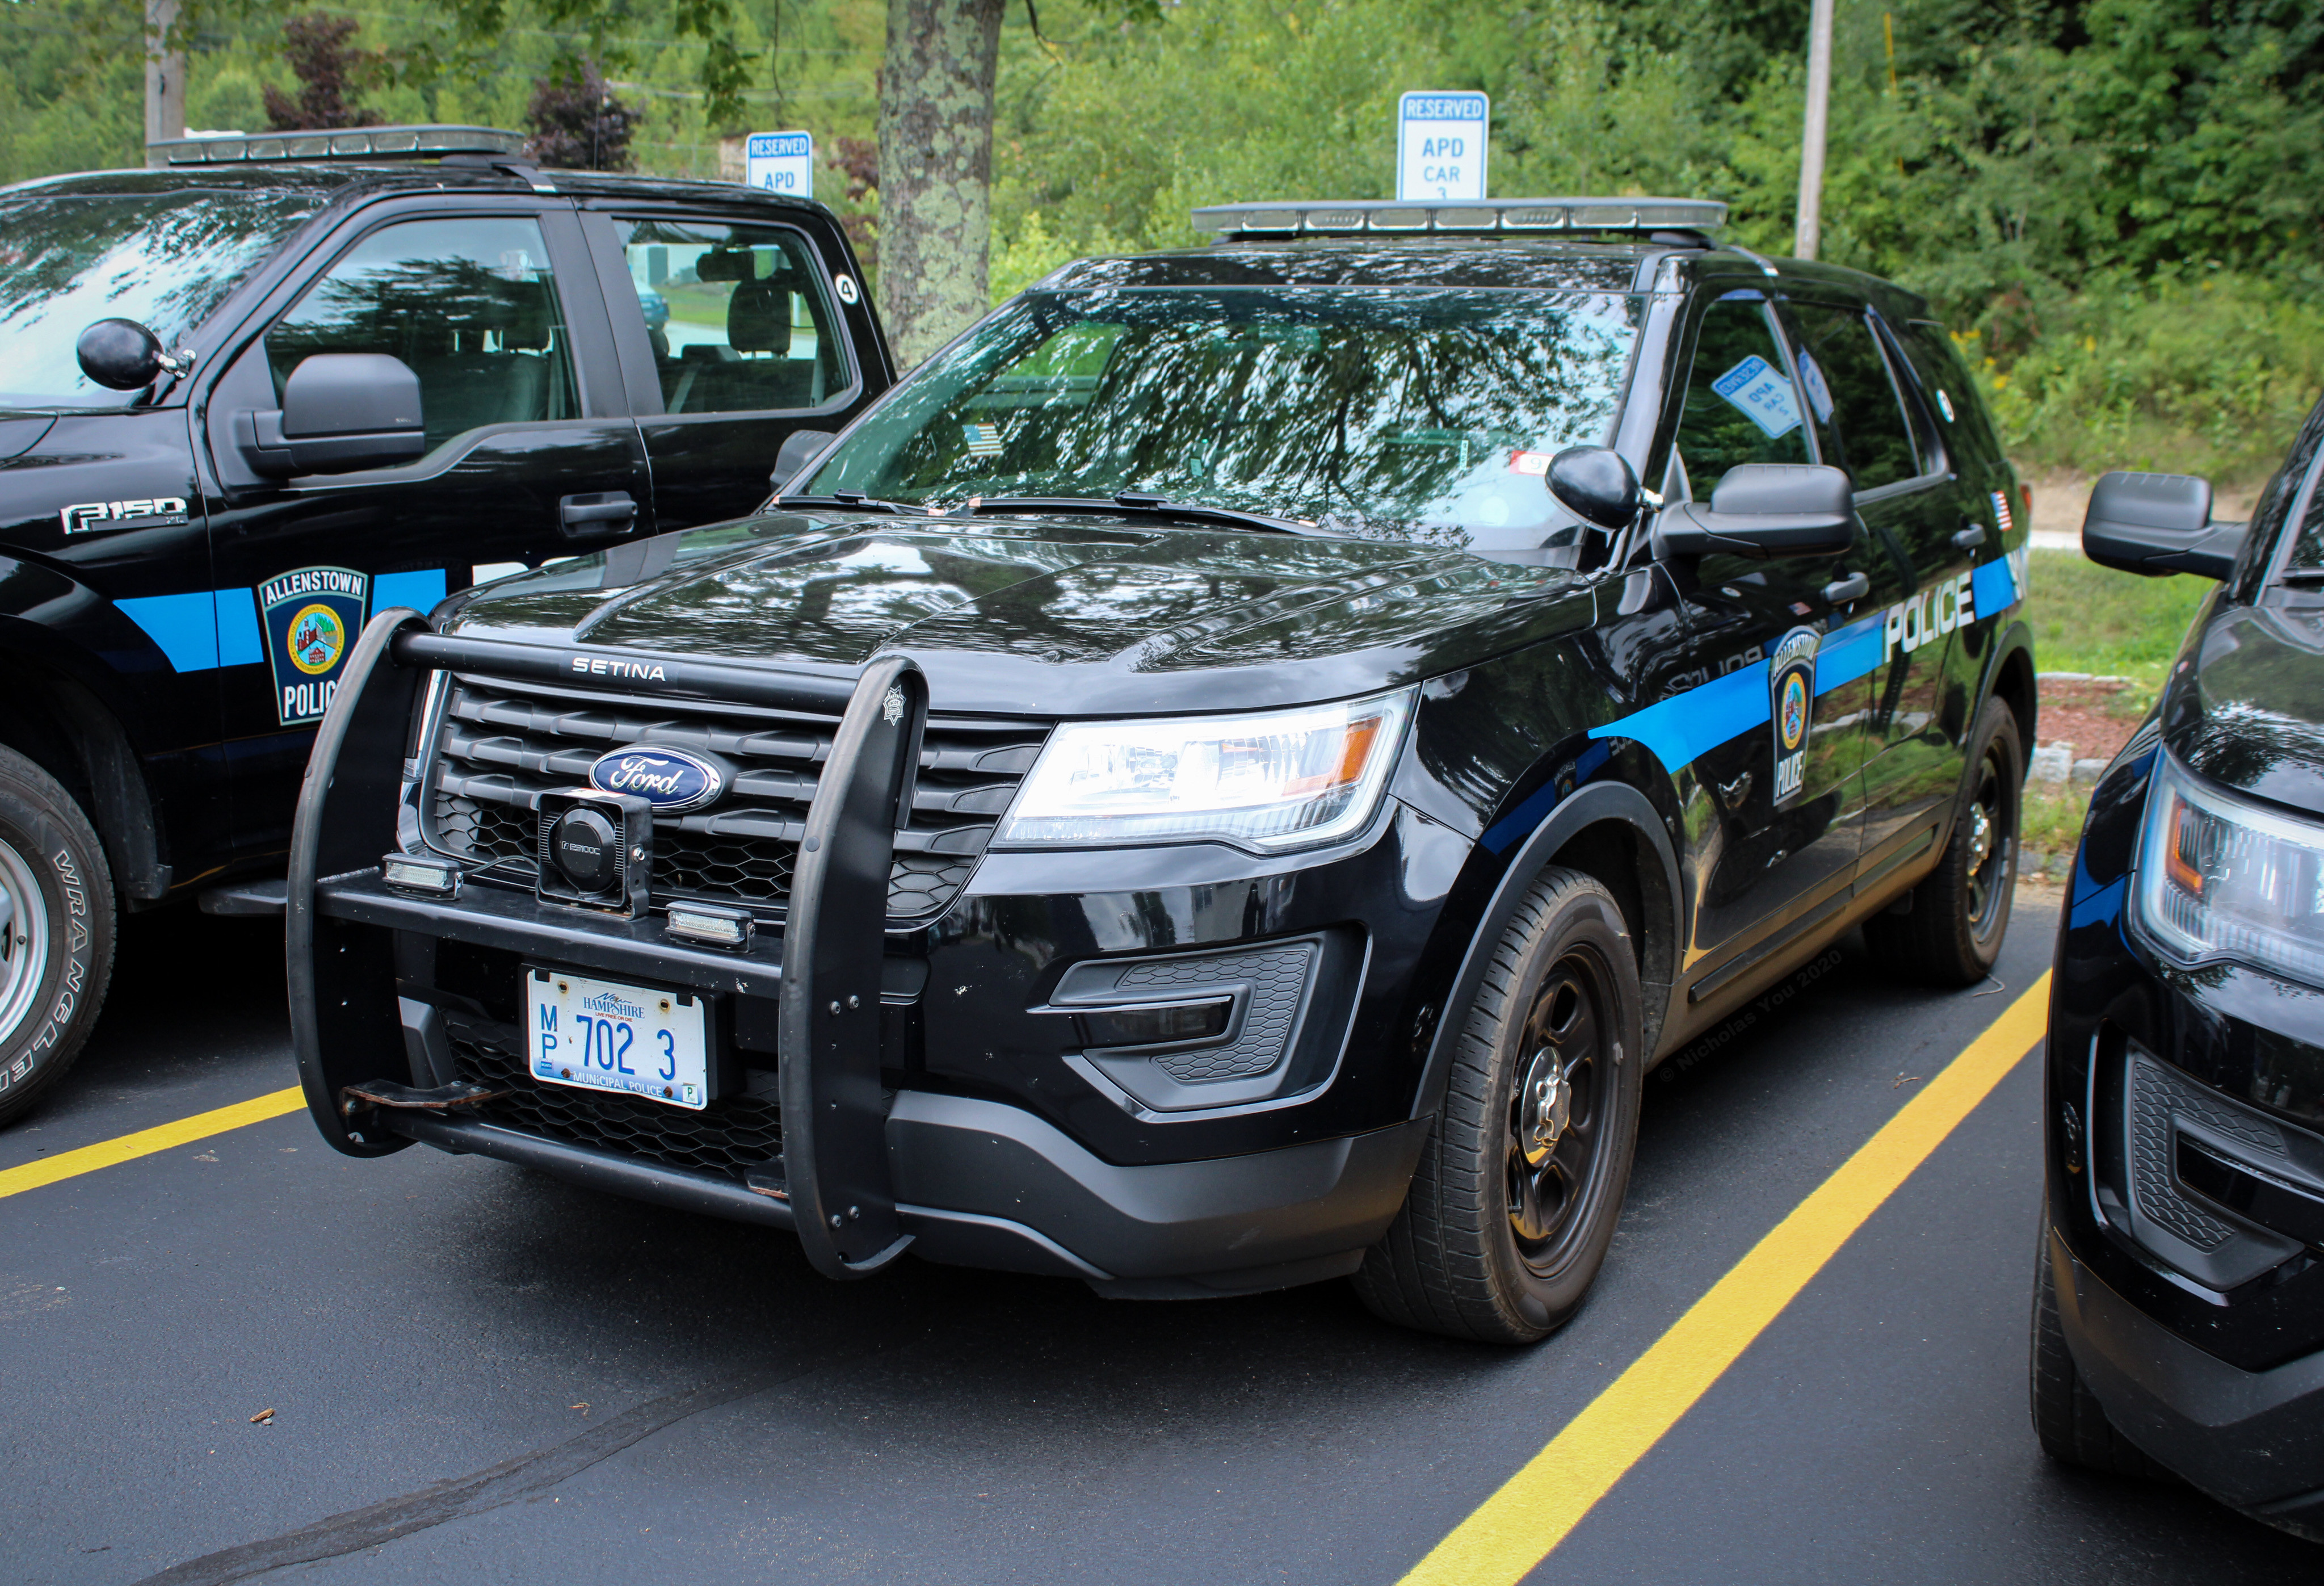 A photo  of Allenstown Police
            Car 3, a 2016-2019 Ford Police Interceptor Utility             taken by Nicholas You